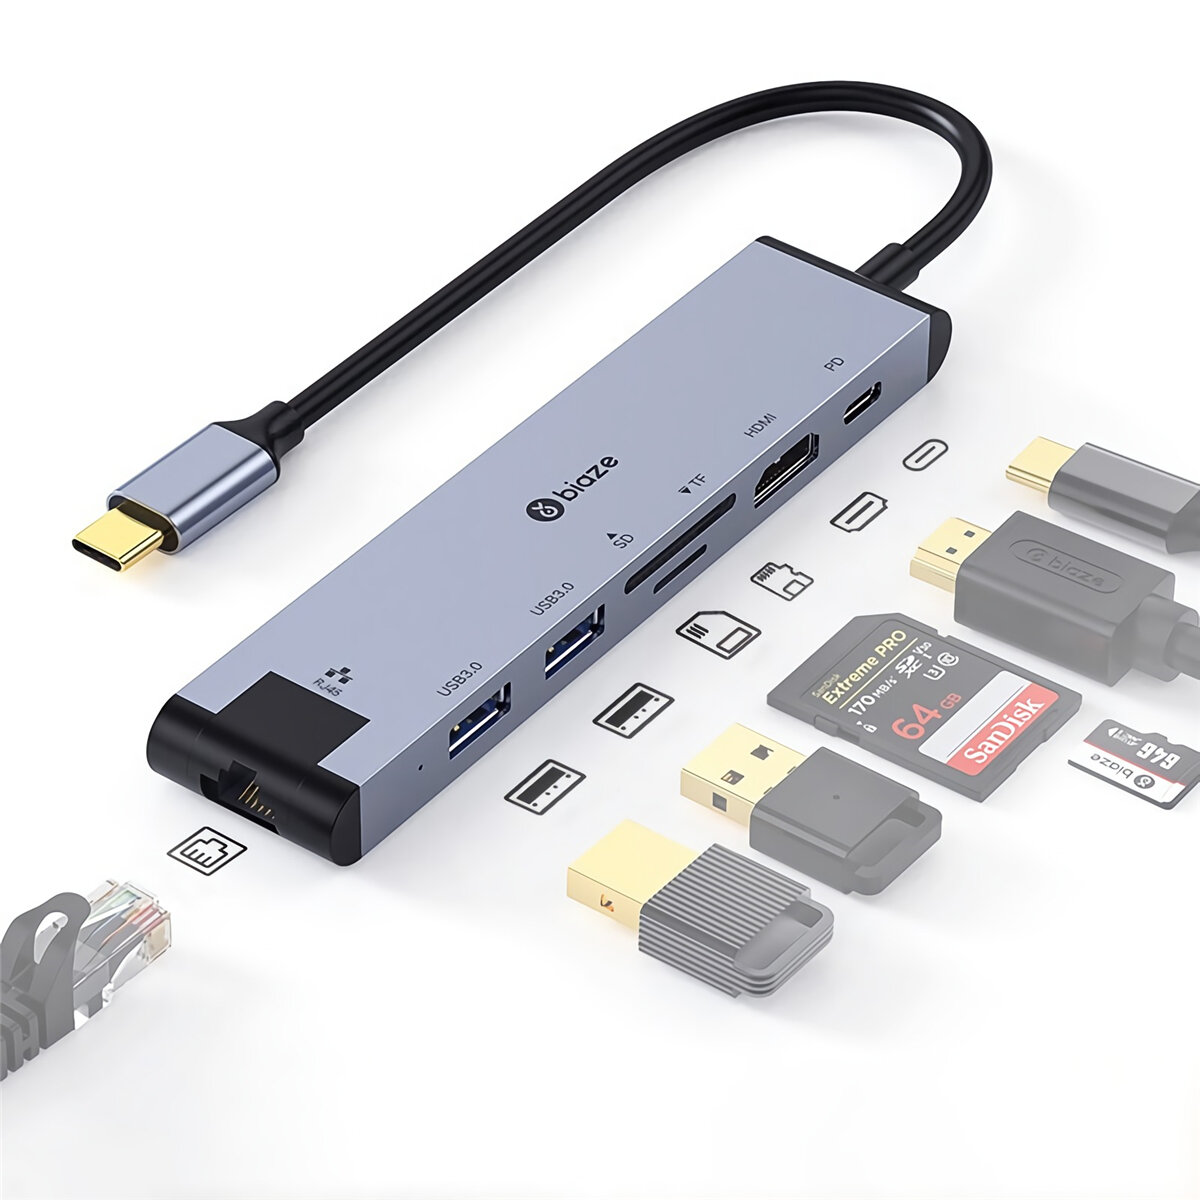 Biaze R48 7-in-1 Type-C Docking Station USB3.0 Hub USB-C to HDMI-compatible 4K Converter TF/SD Card Reader PD Fast Charg